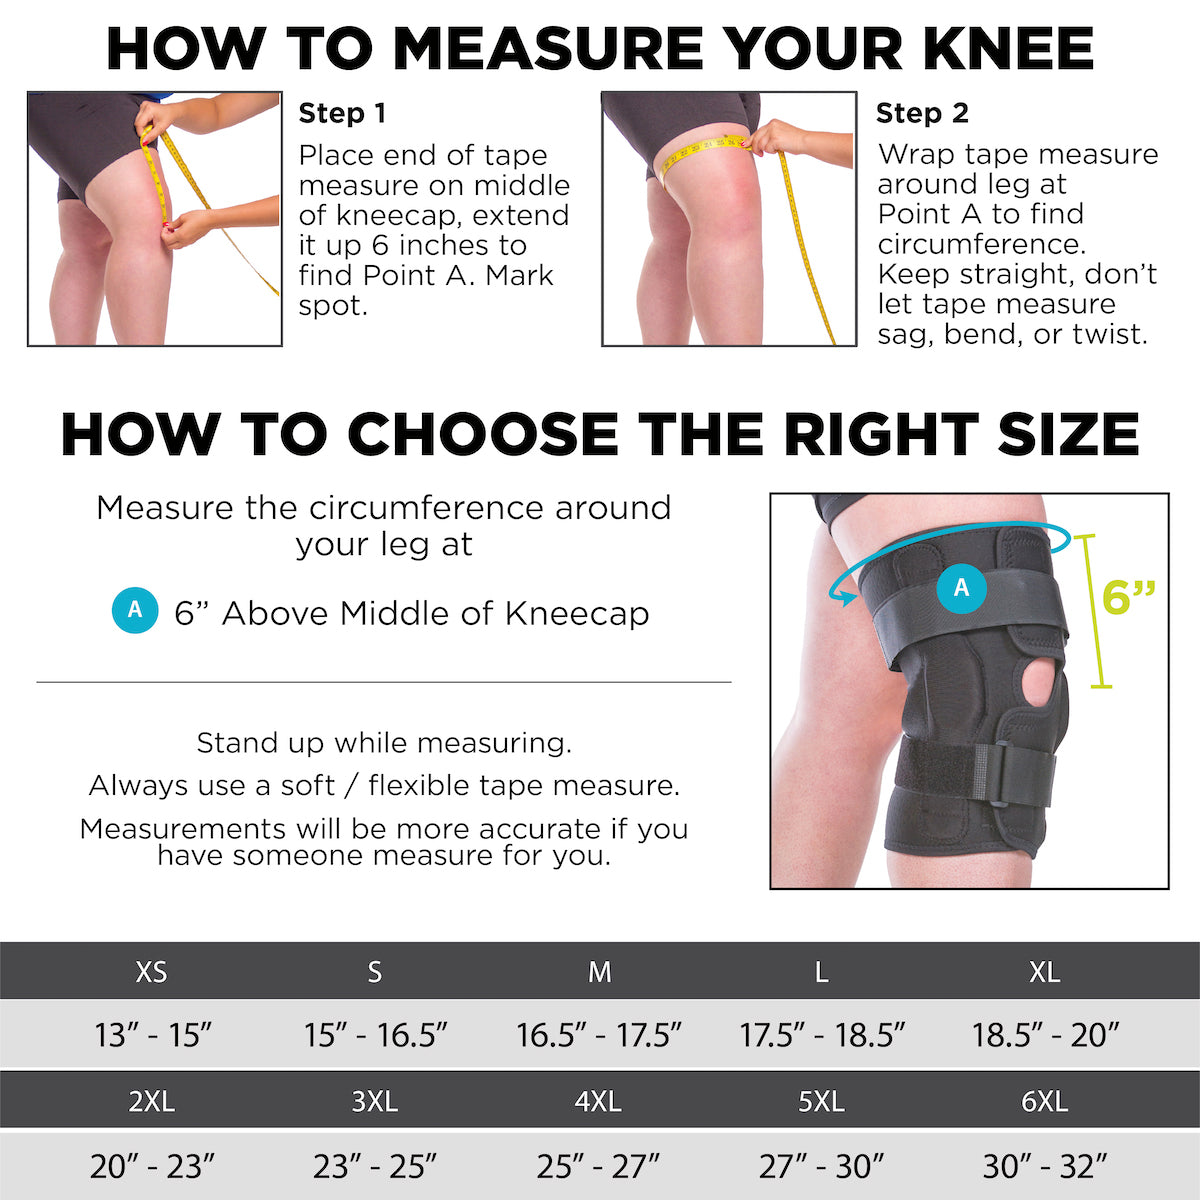 Sizing chart for meniscus knee brace. Available in sizes XS-6XL.